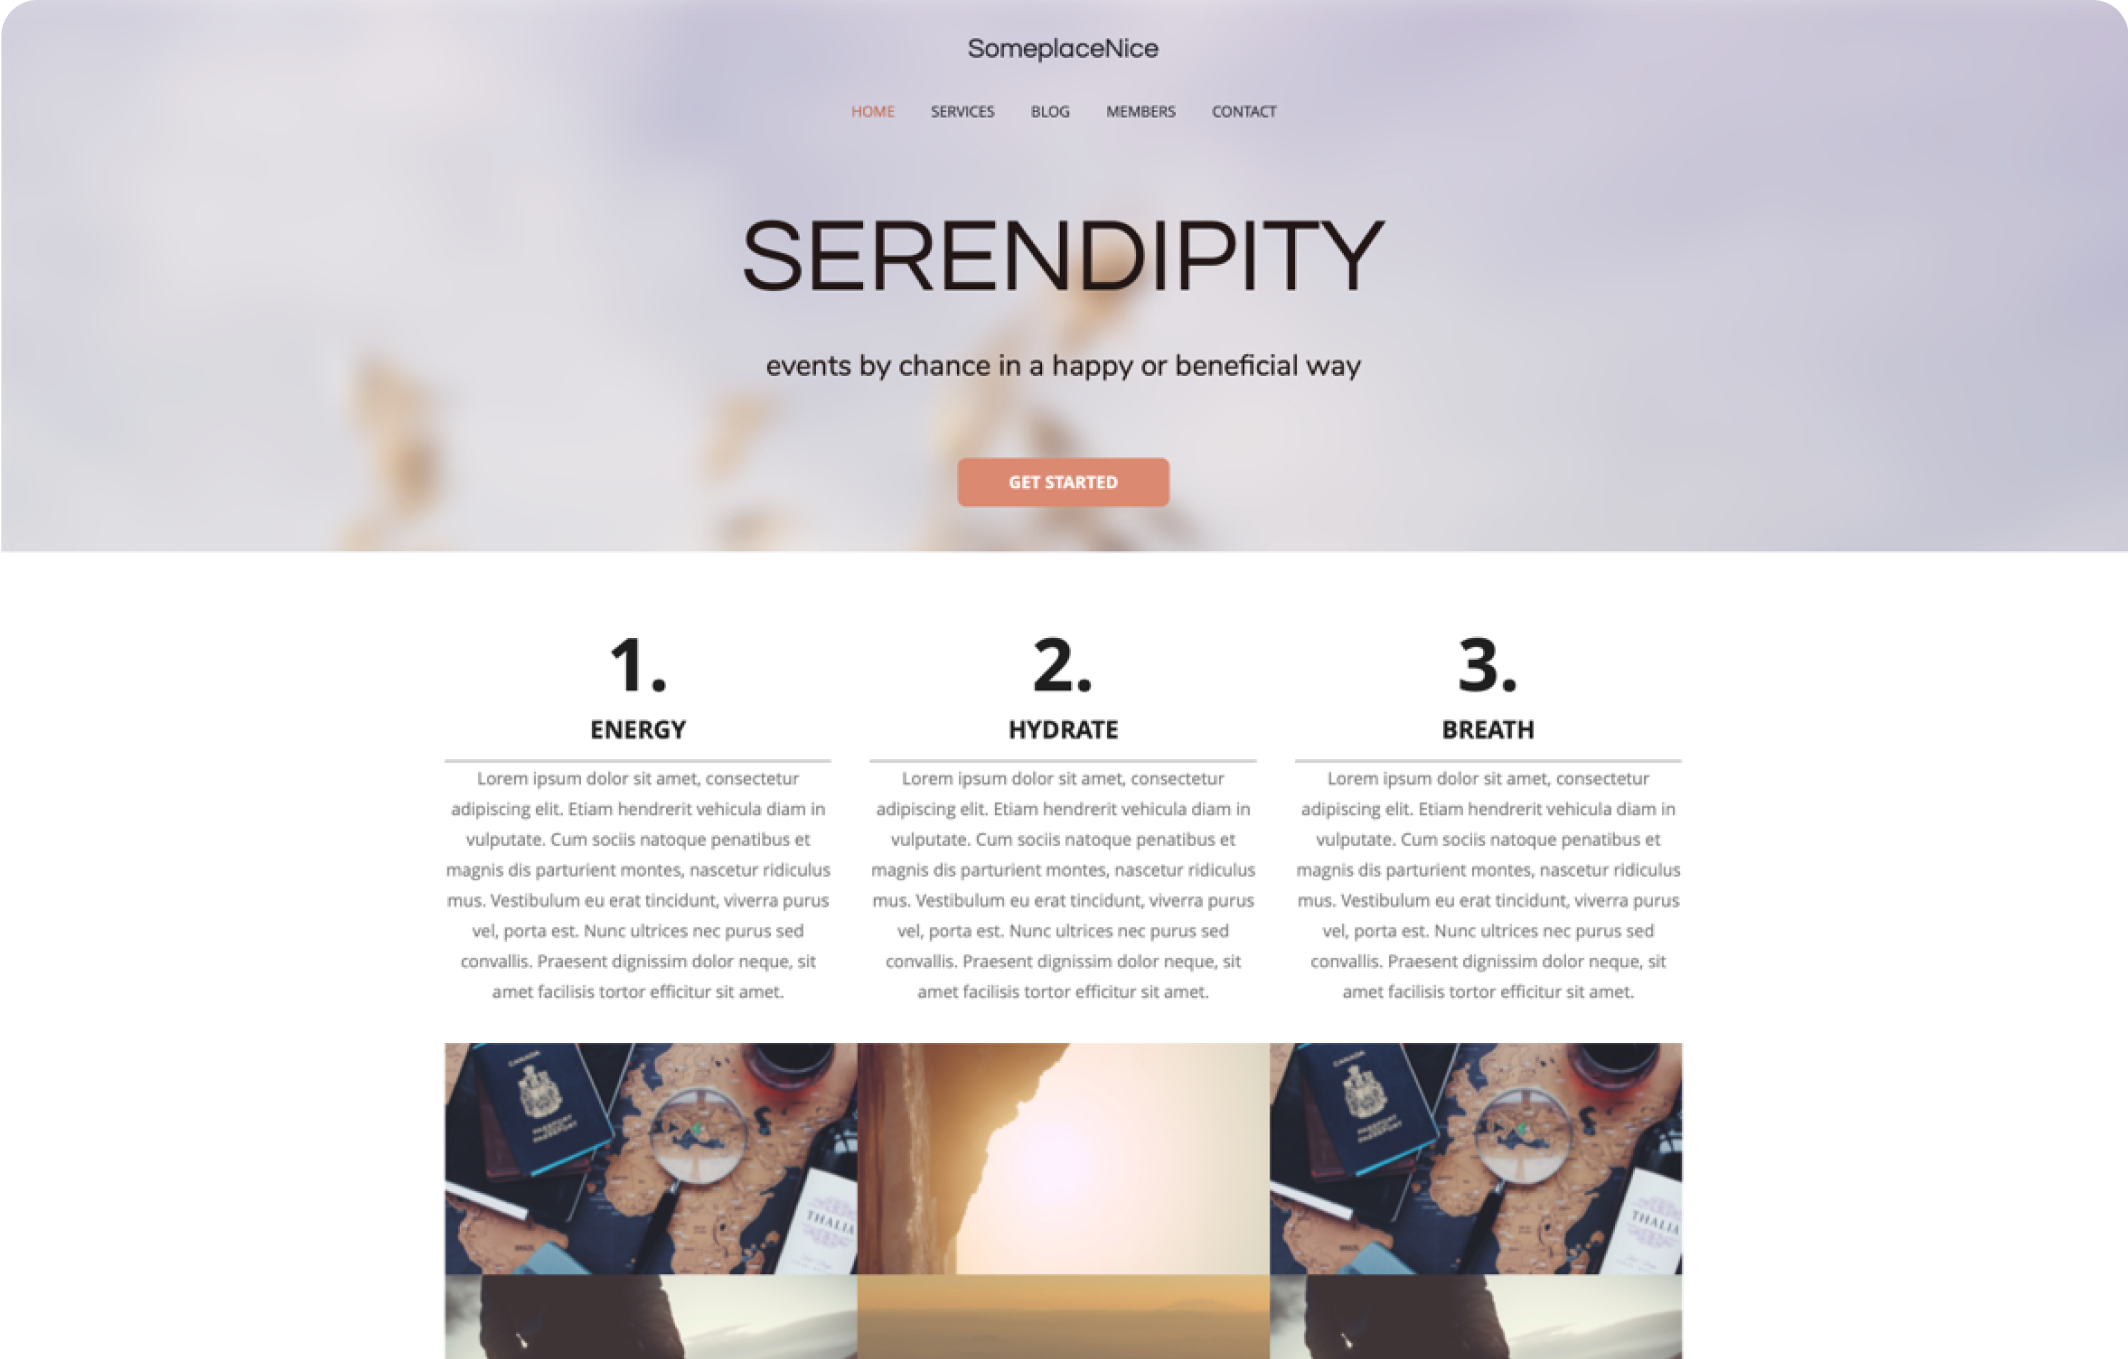 website template with a narrow header image with content columns to organize text